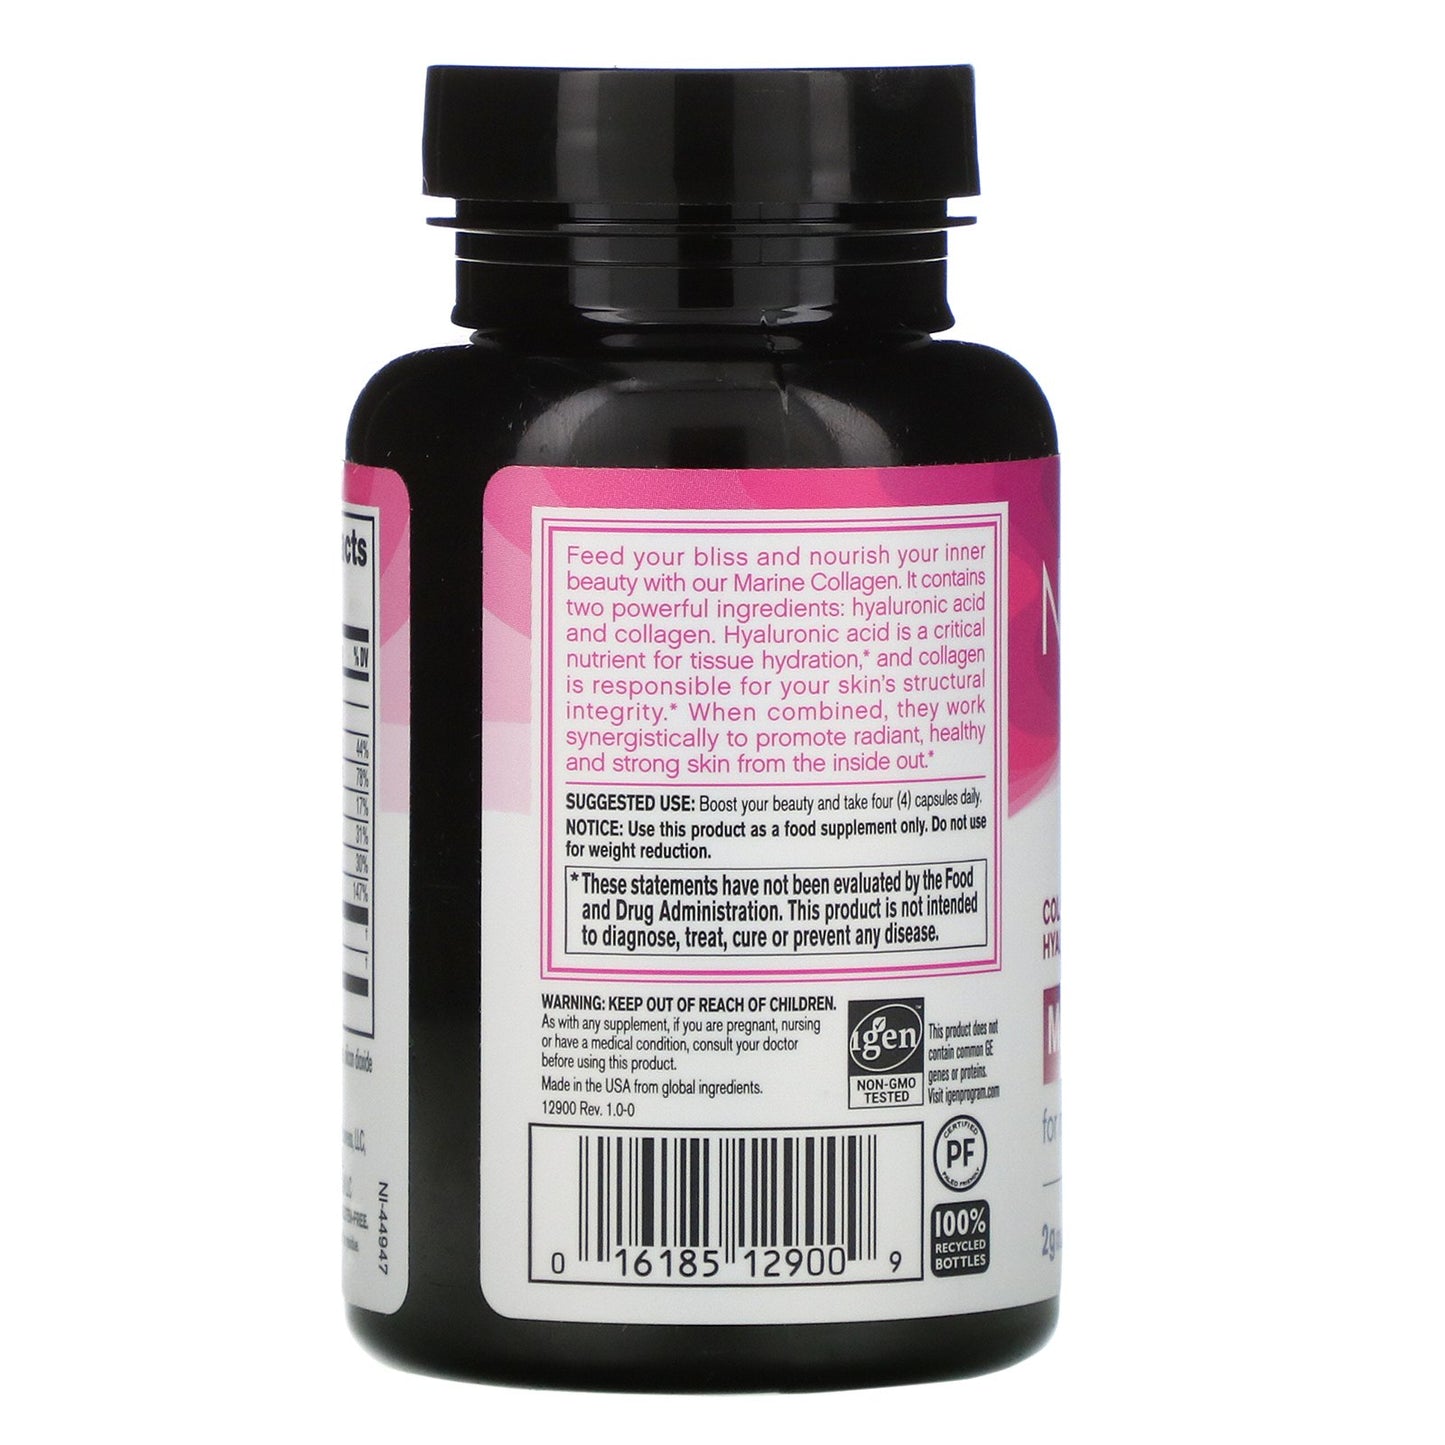 Neocell Marine Collagen 120 Capsules